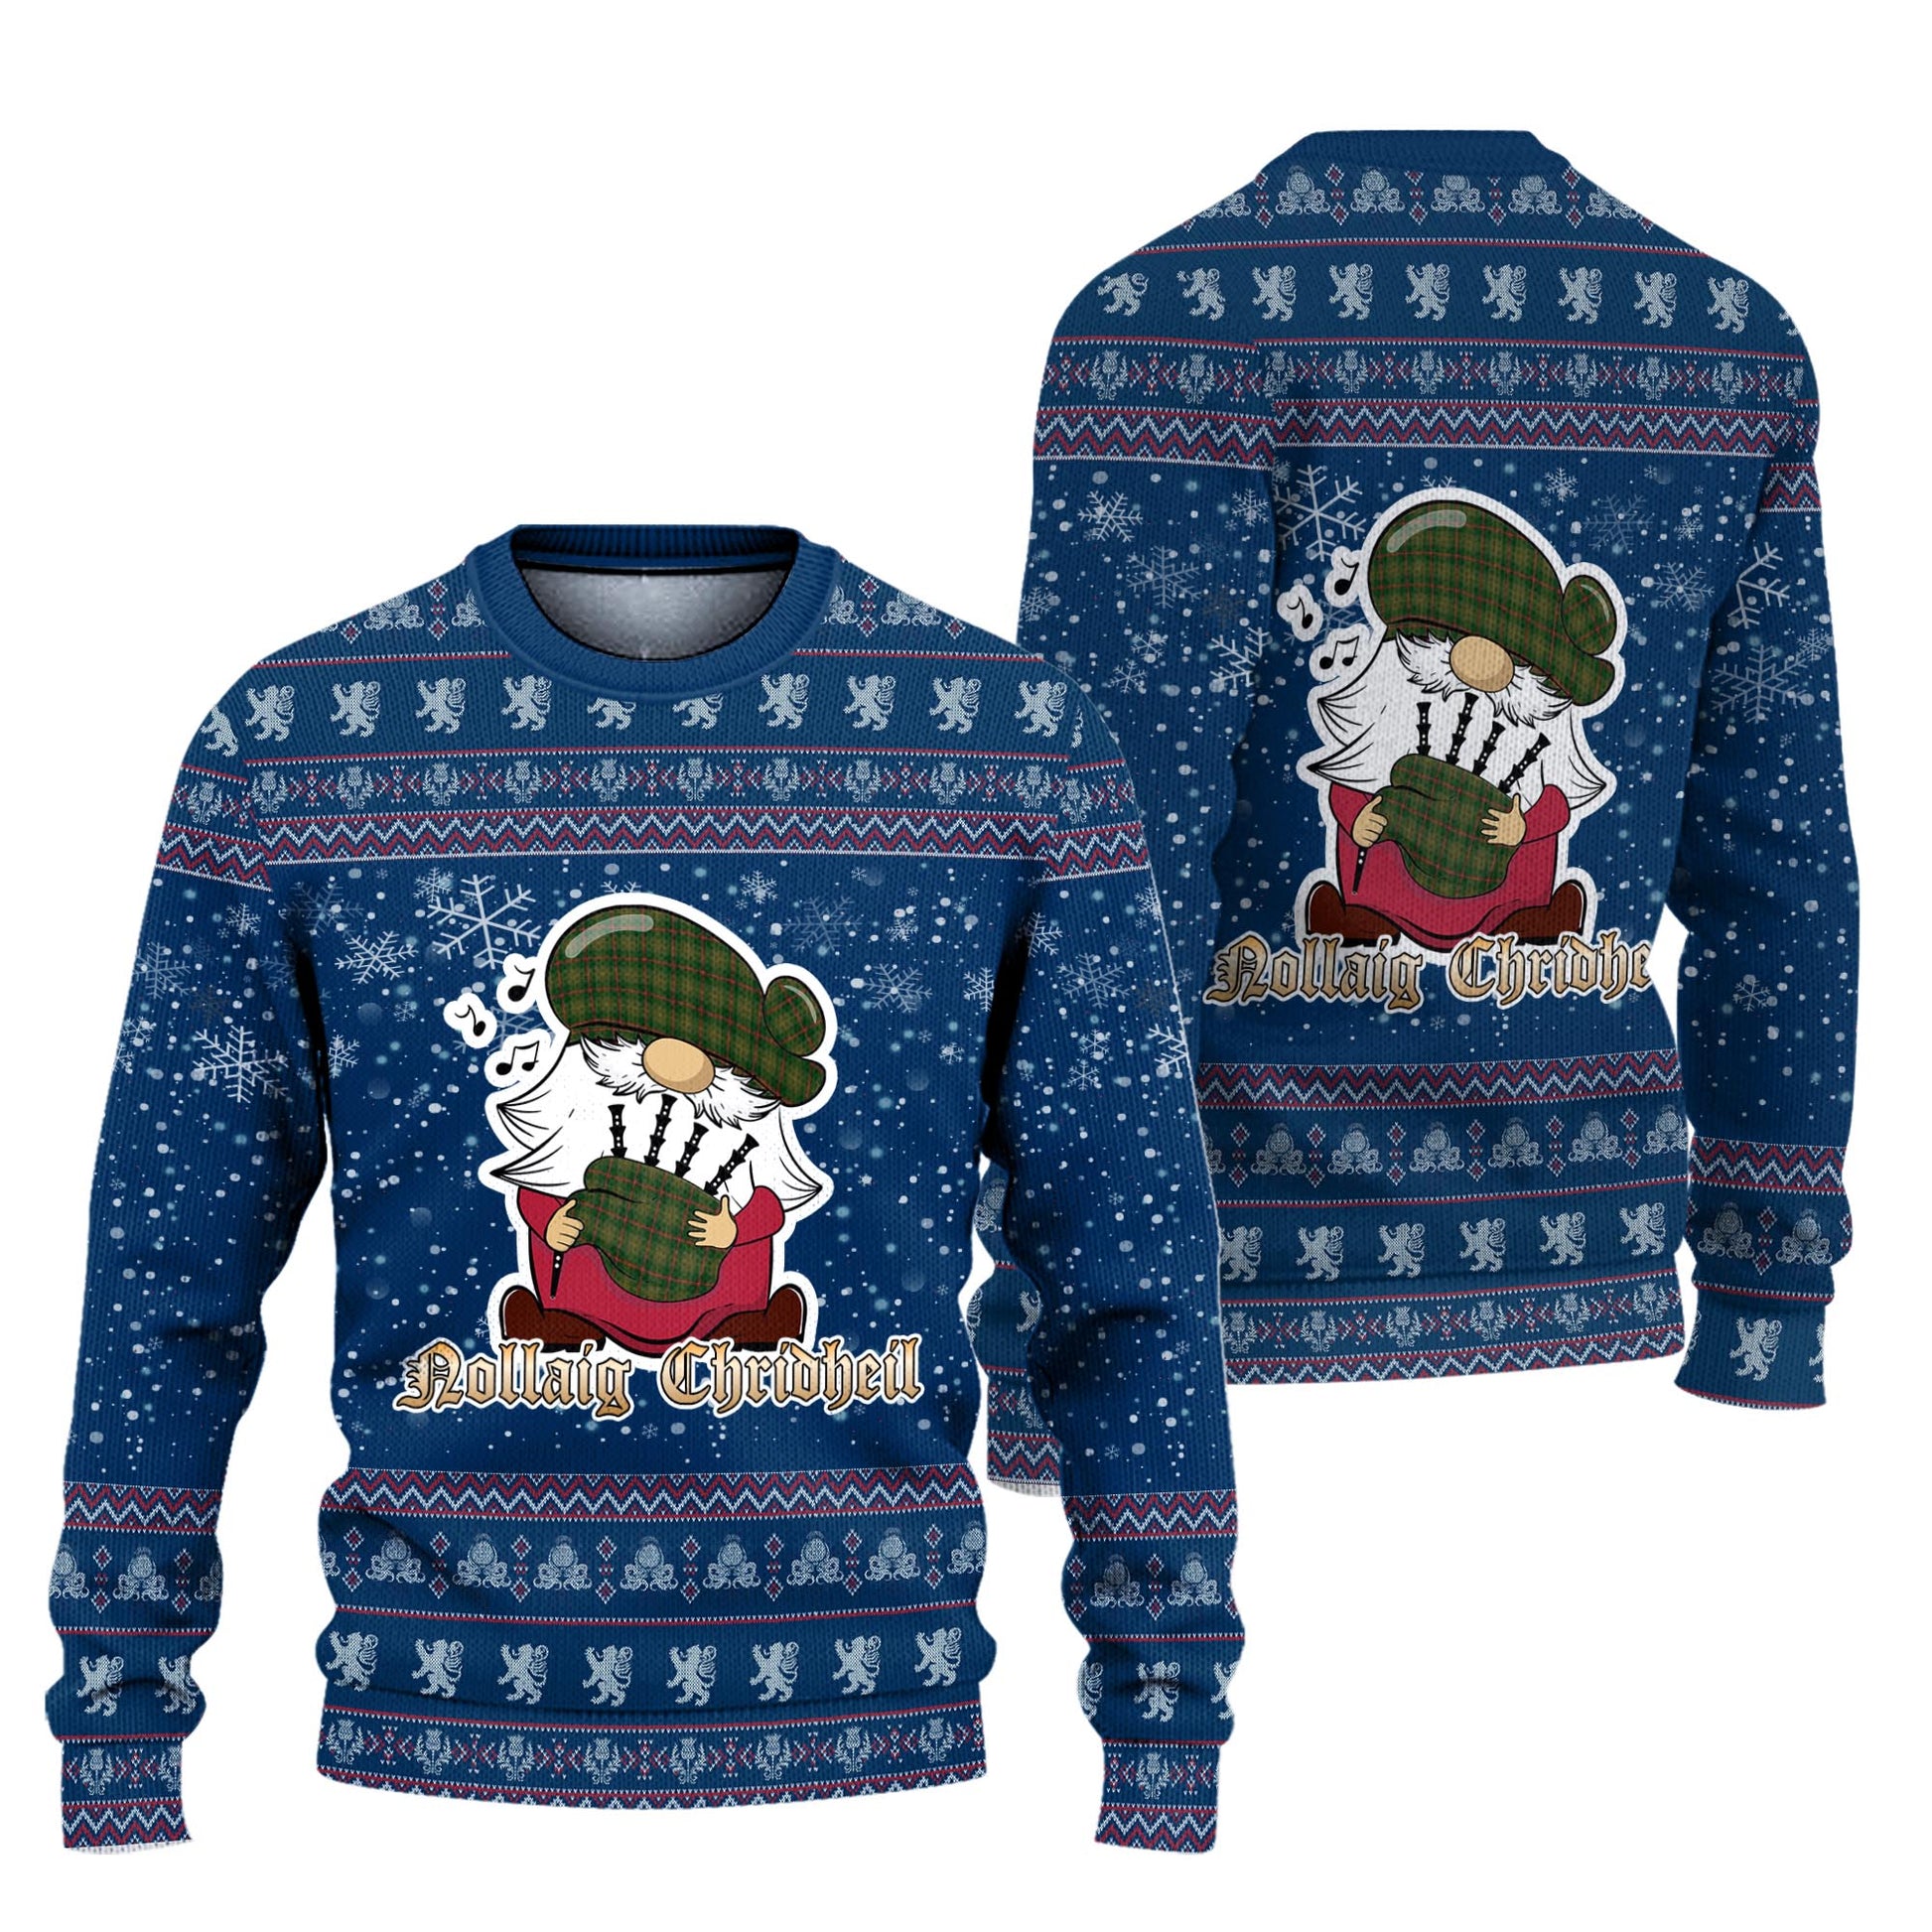 Symington Clan Christmas Family Knitted Sweater with Funny Gnome Playing Bagpipes Unisex Blue - Tartanvibesclothing